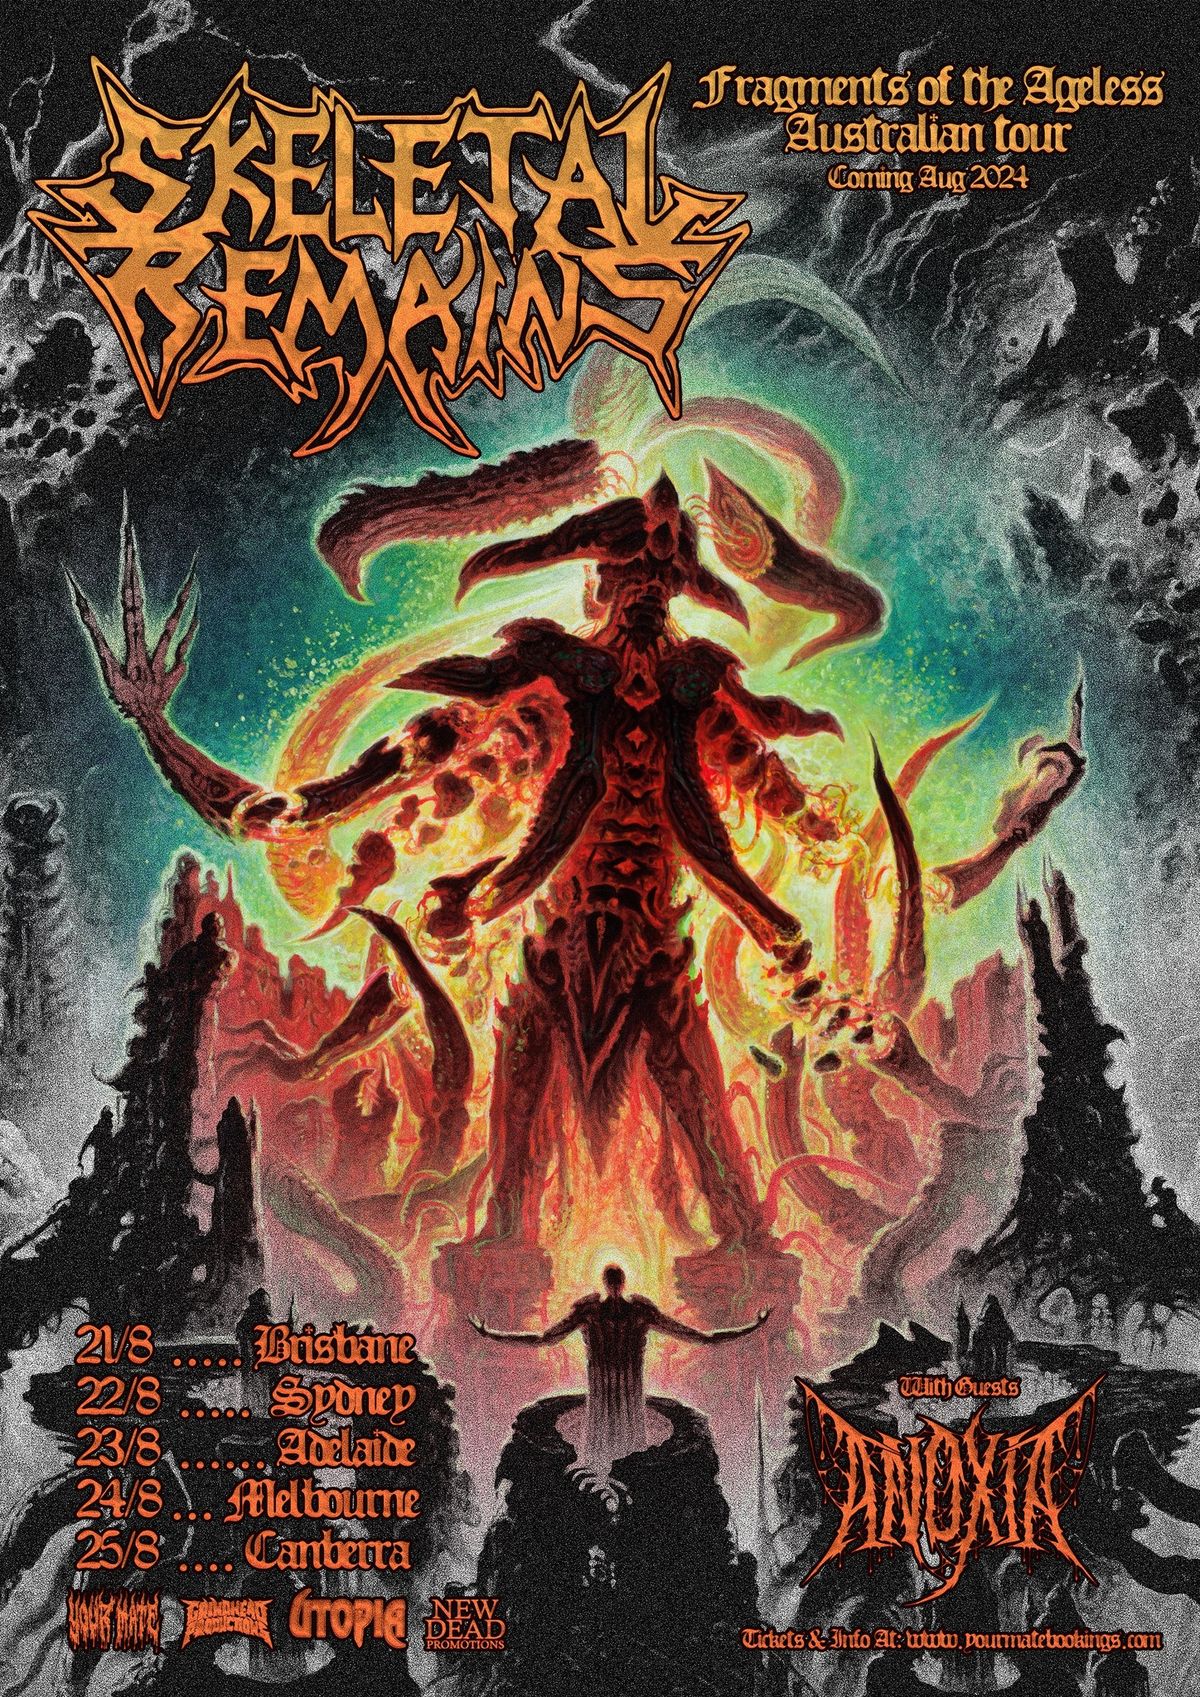 Skeletal Remains (USA) Sydney with Anoxia, Carnal Viscera & Slaughtercult